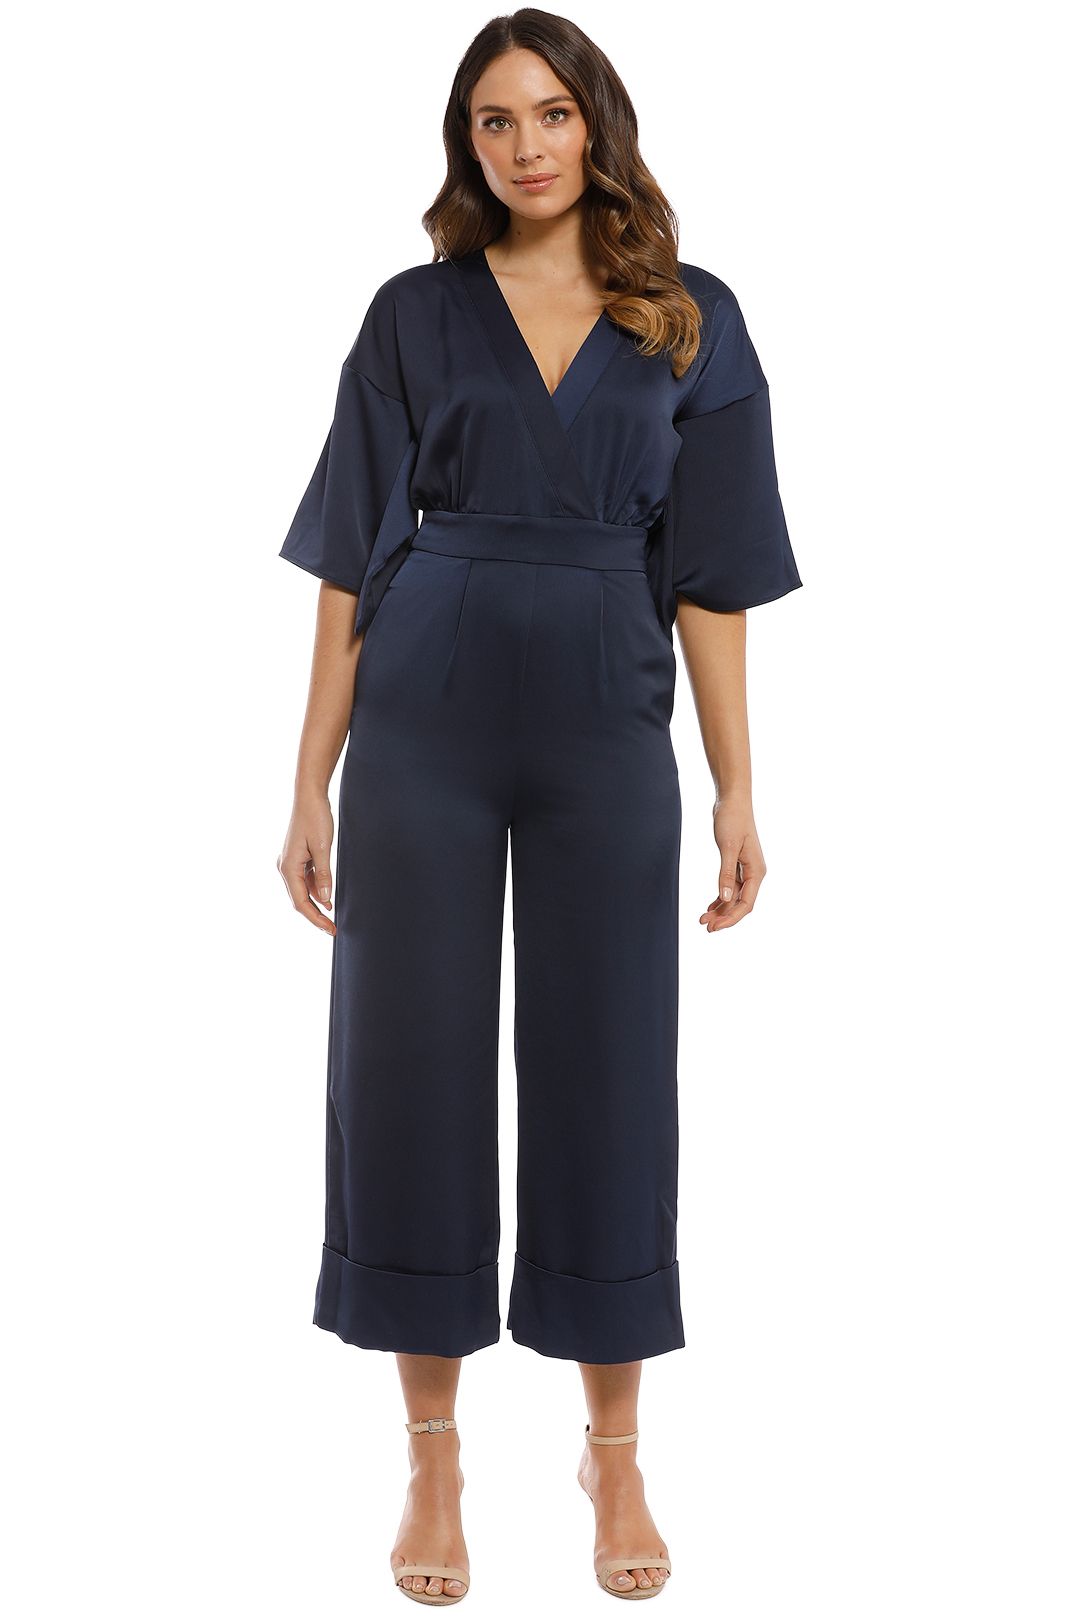 Iris and Ink - Sidney Satin Jumpsuit - Navy - Front